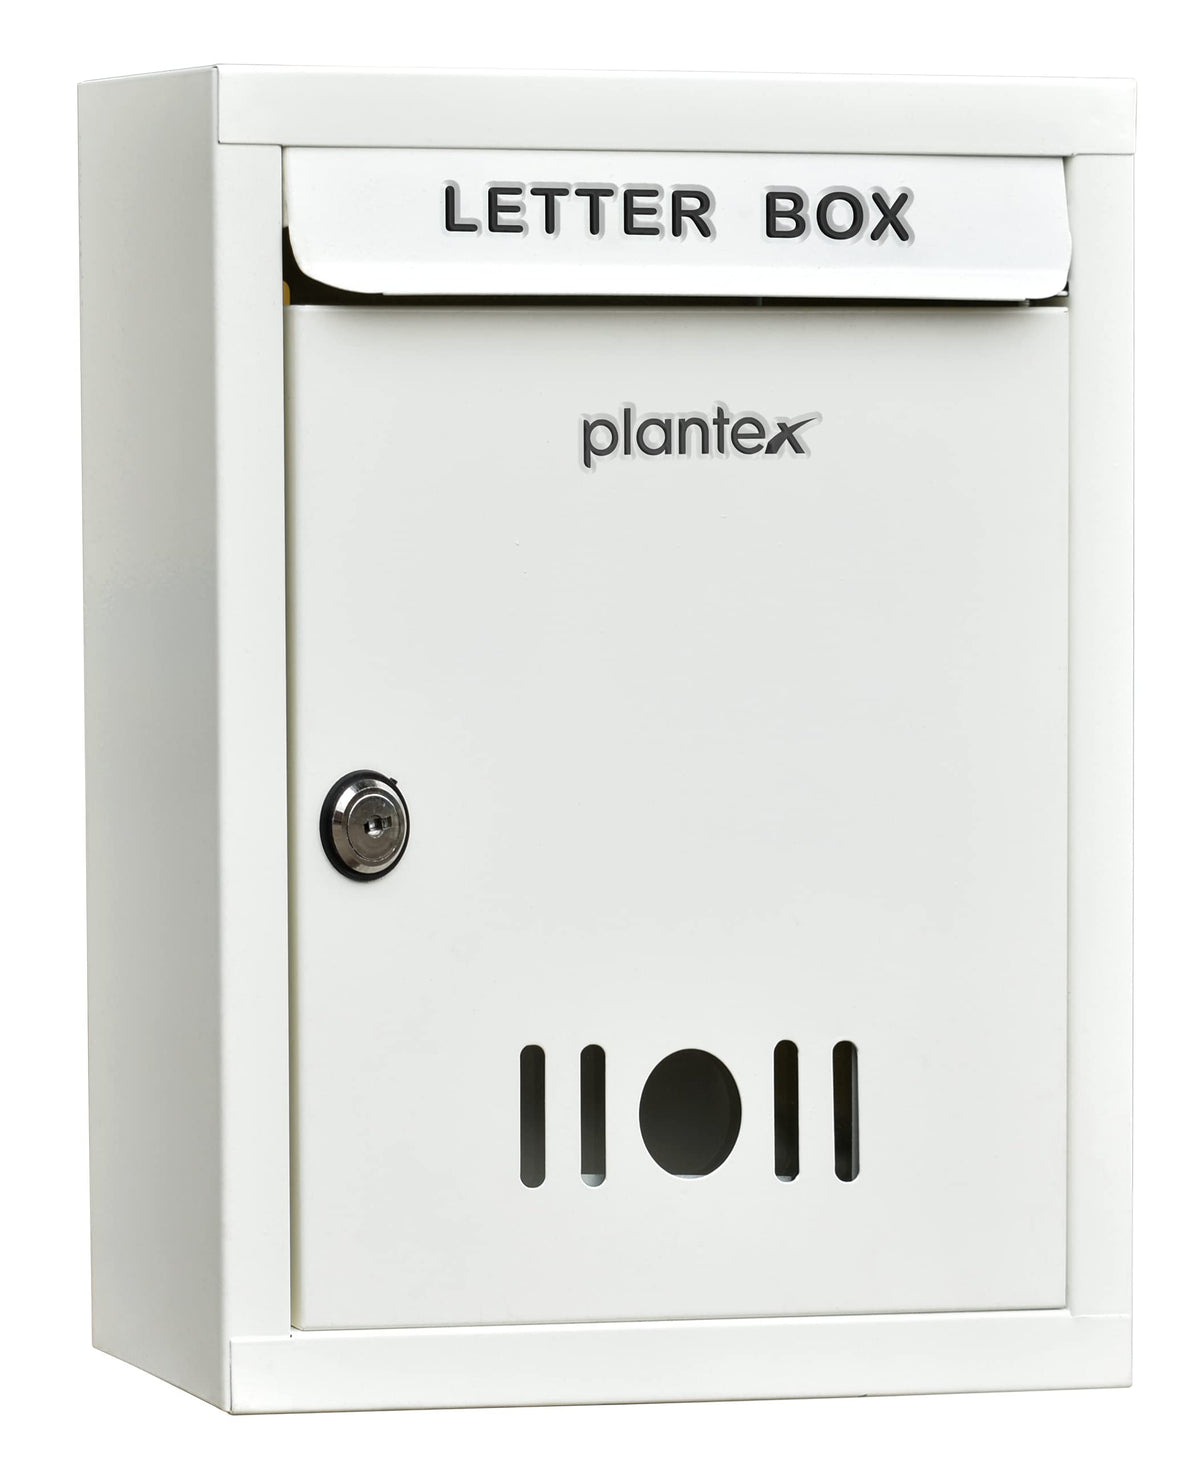 Plantex Wall Mount A4 Size Letter Box - Mail Box/Letter Box for Home gate with Key Lock (Ivory)